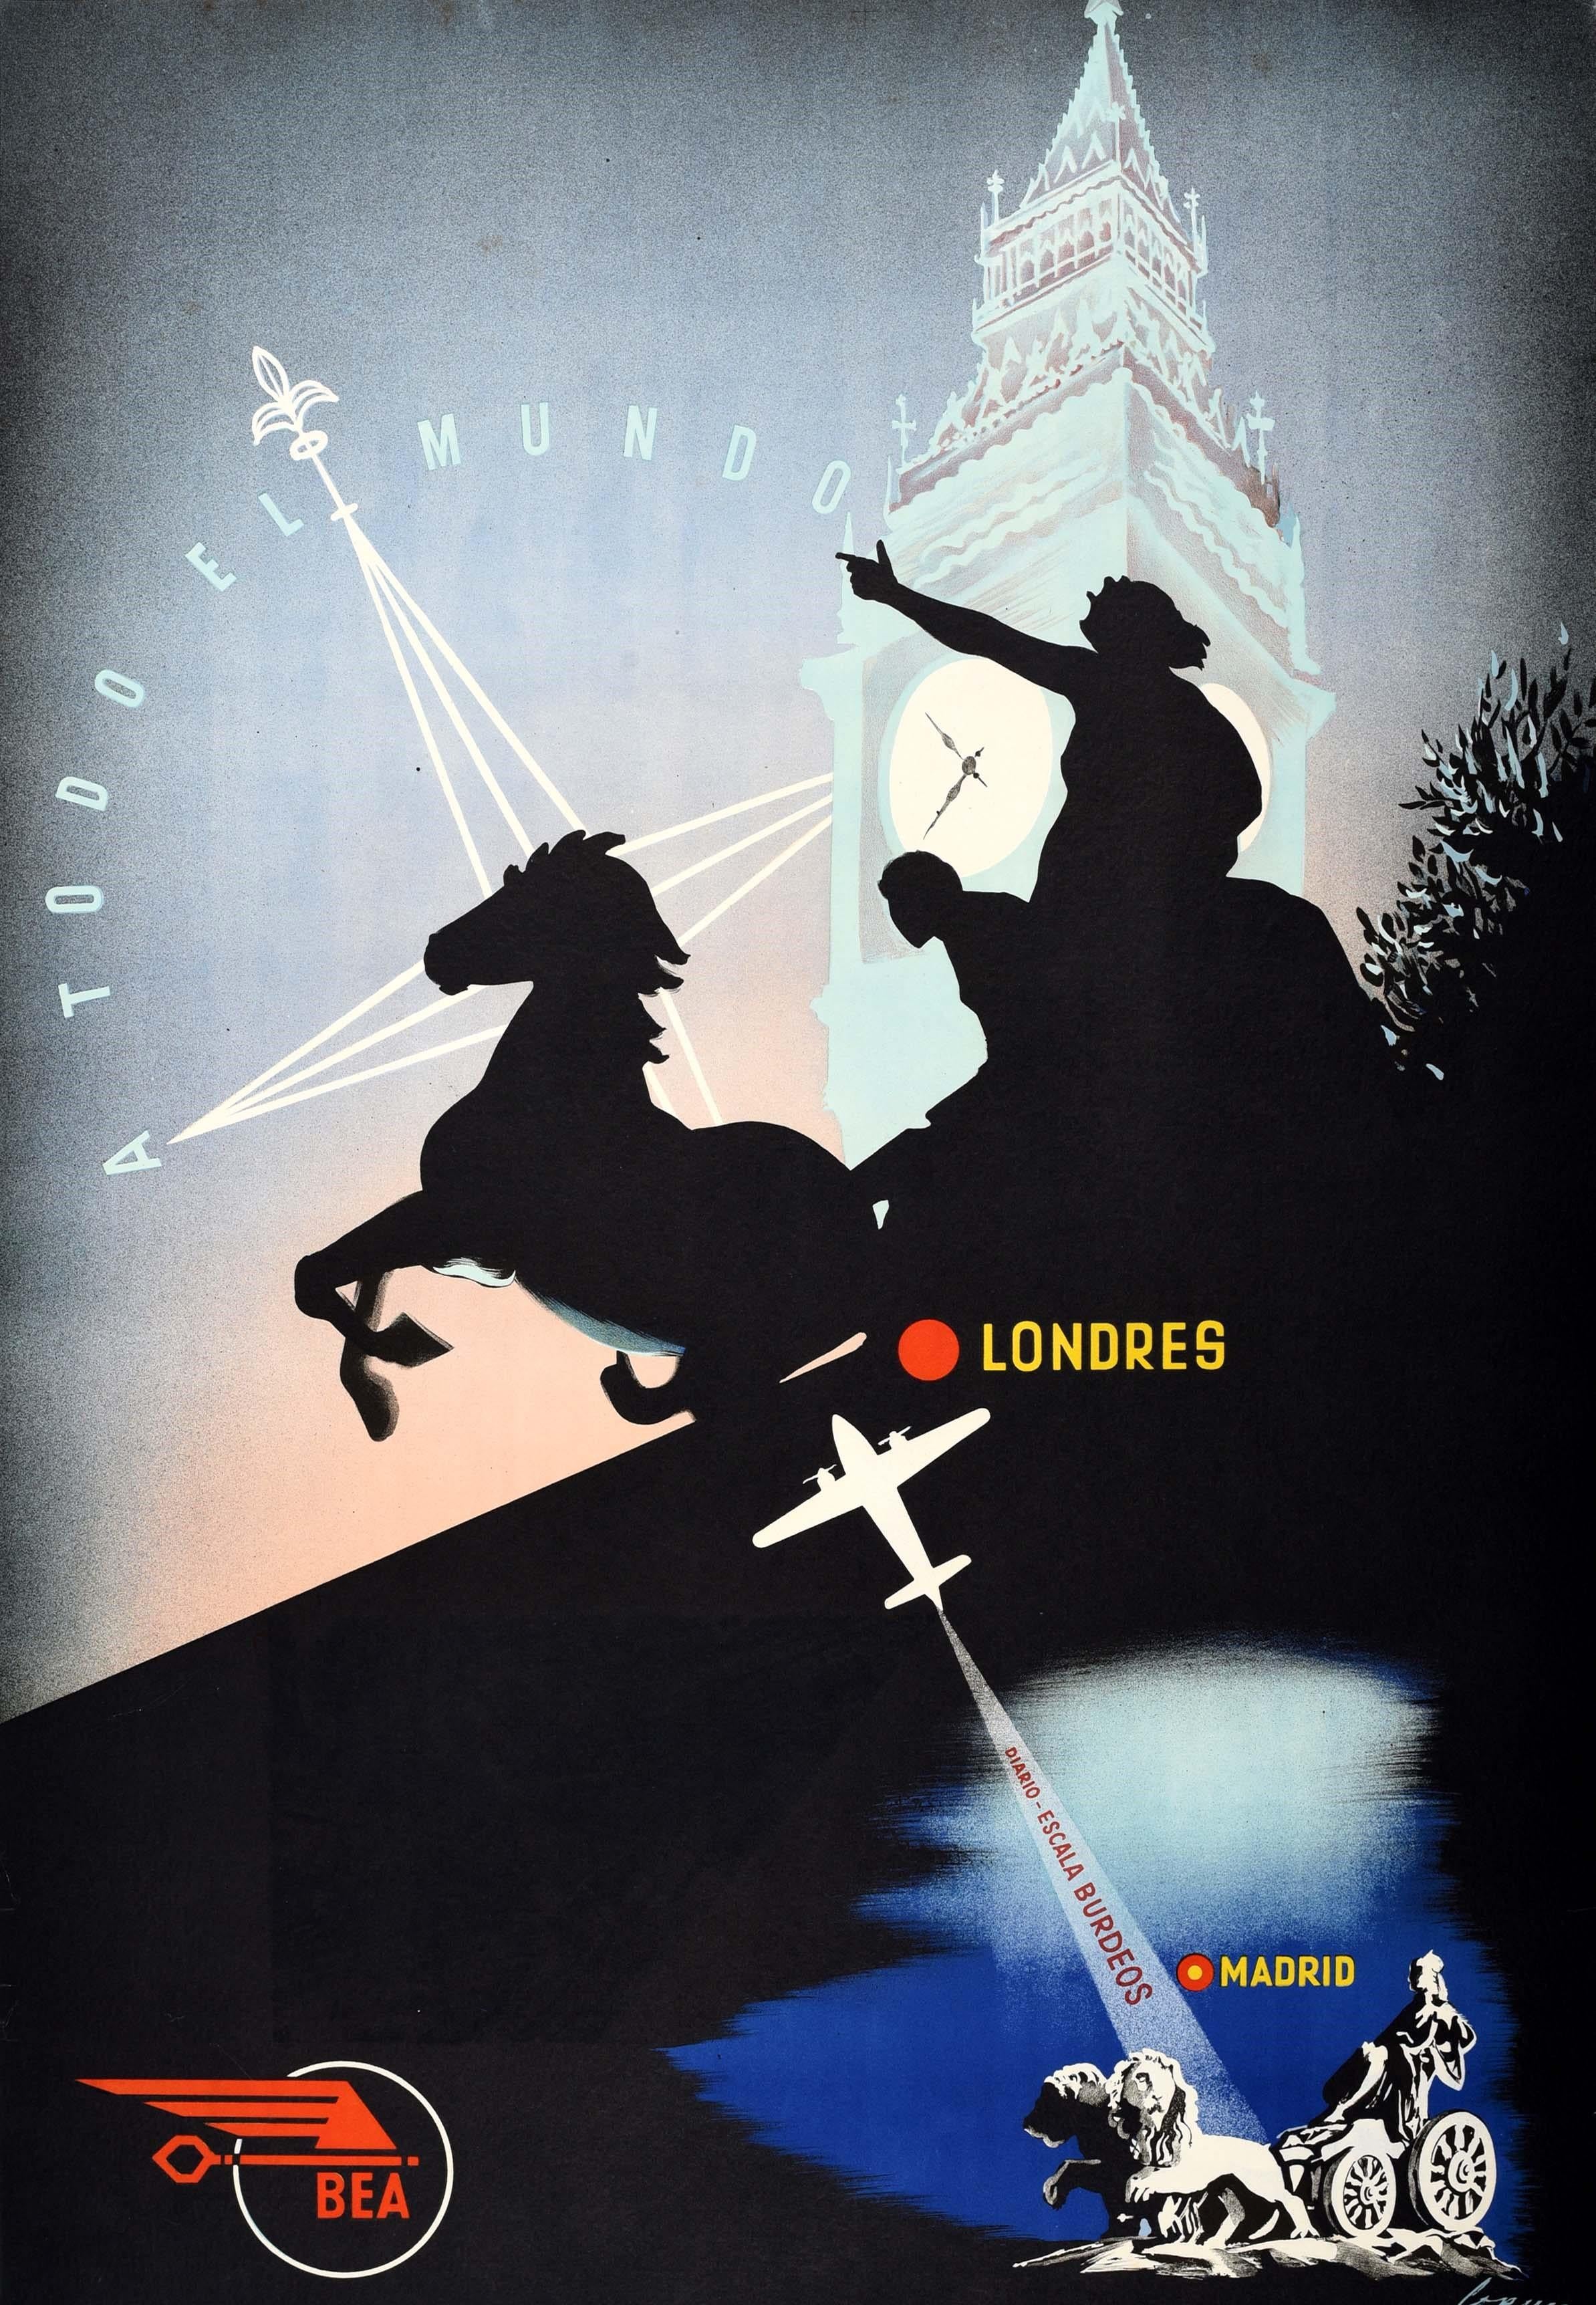 Paper Original Vintage Airline Travel Poster Madrid To London BEA To The Whole World For Sale